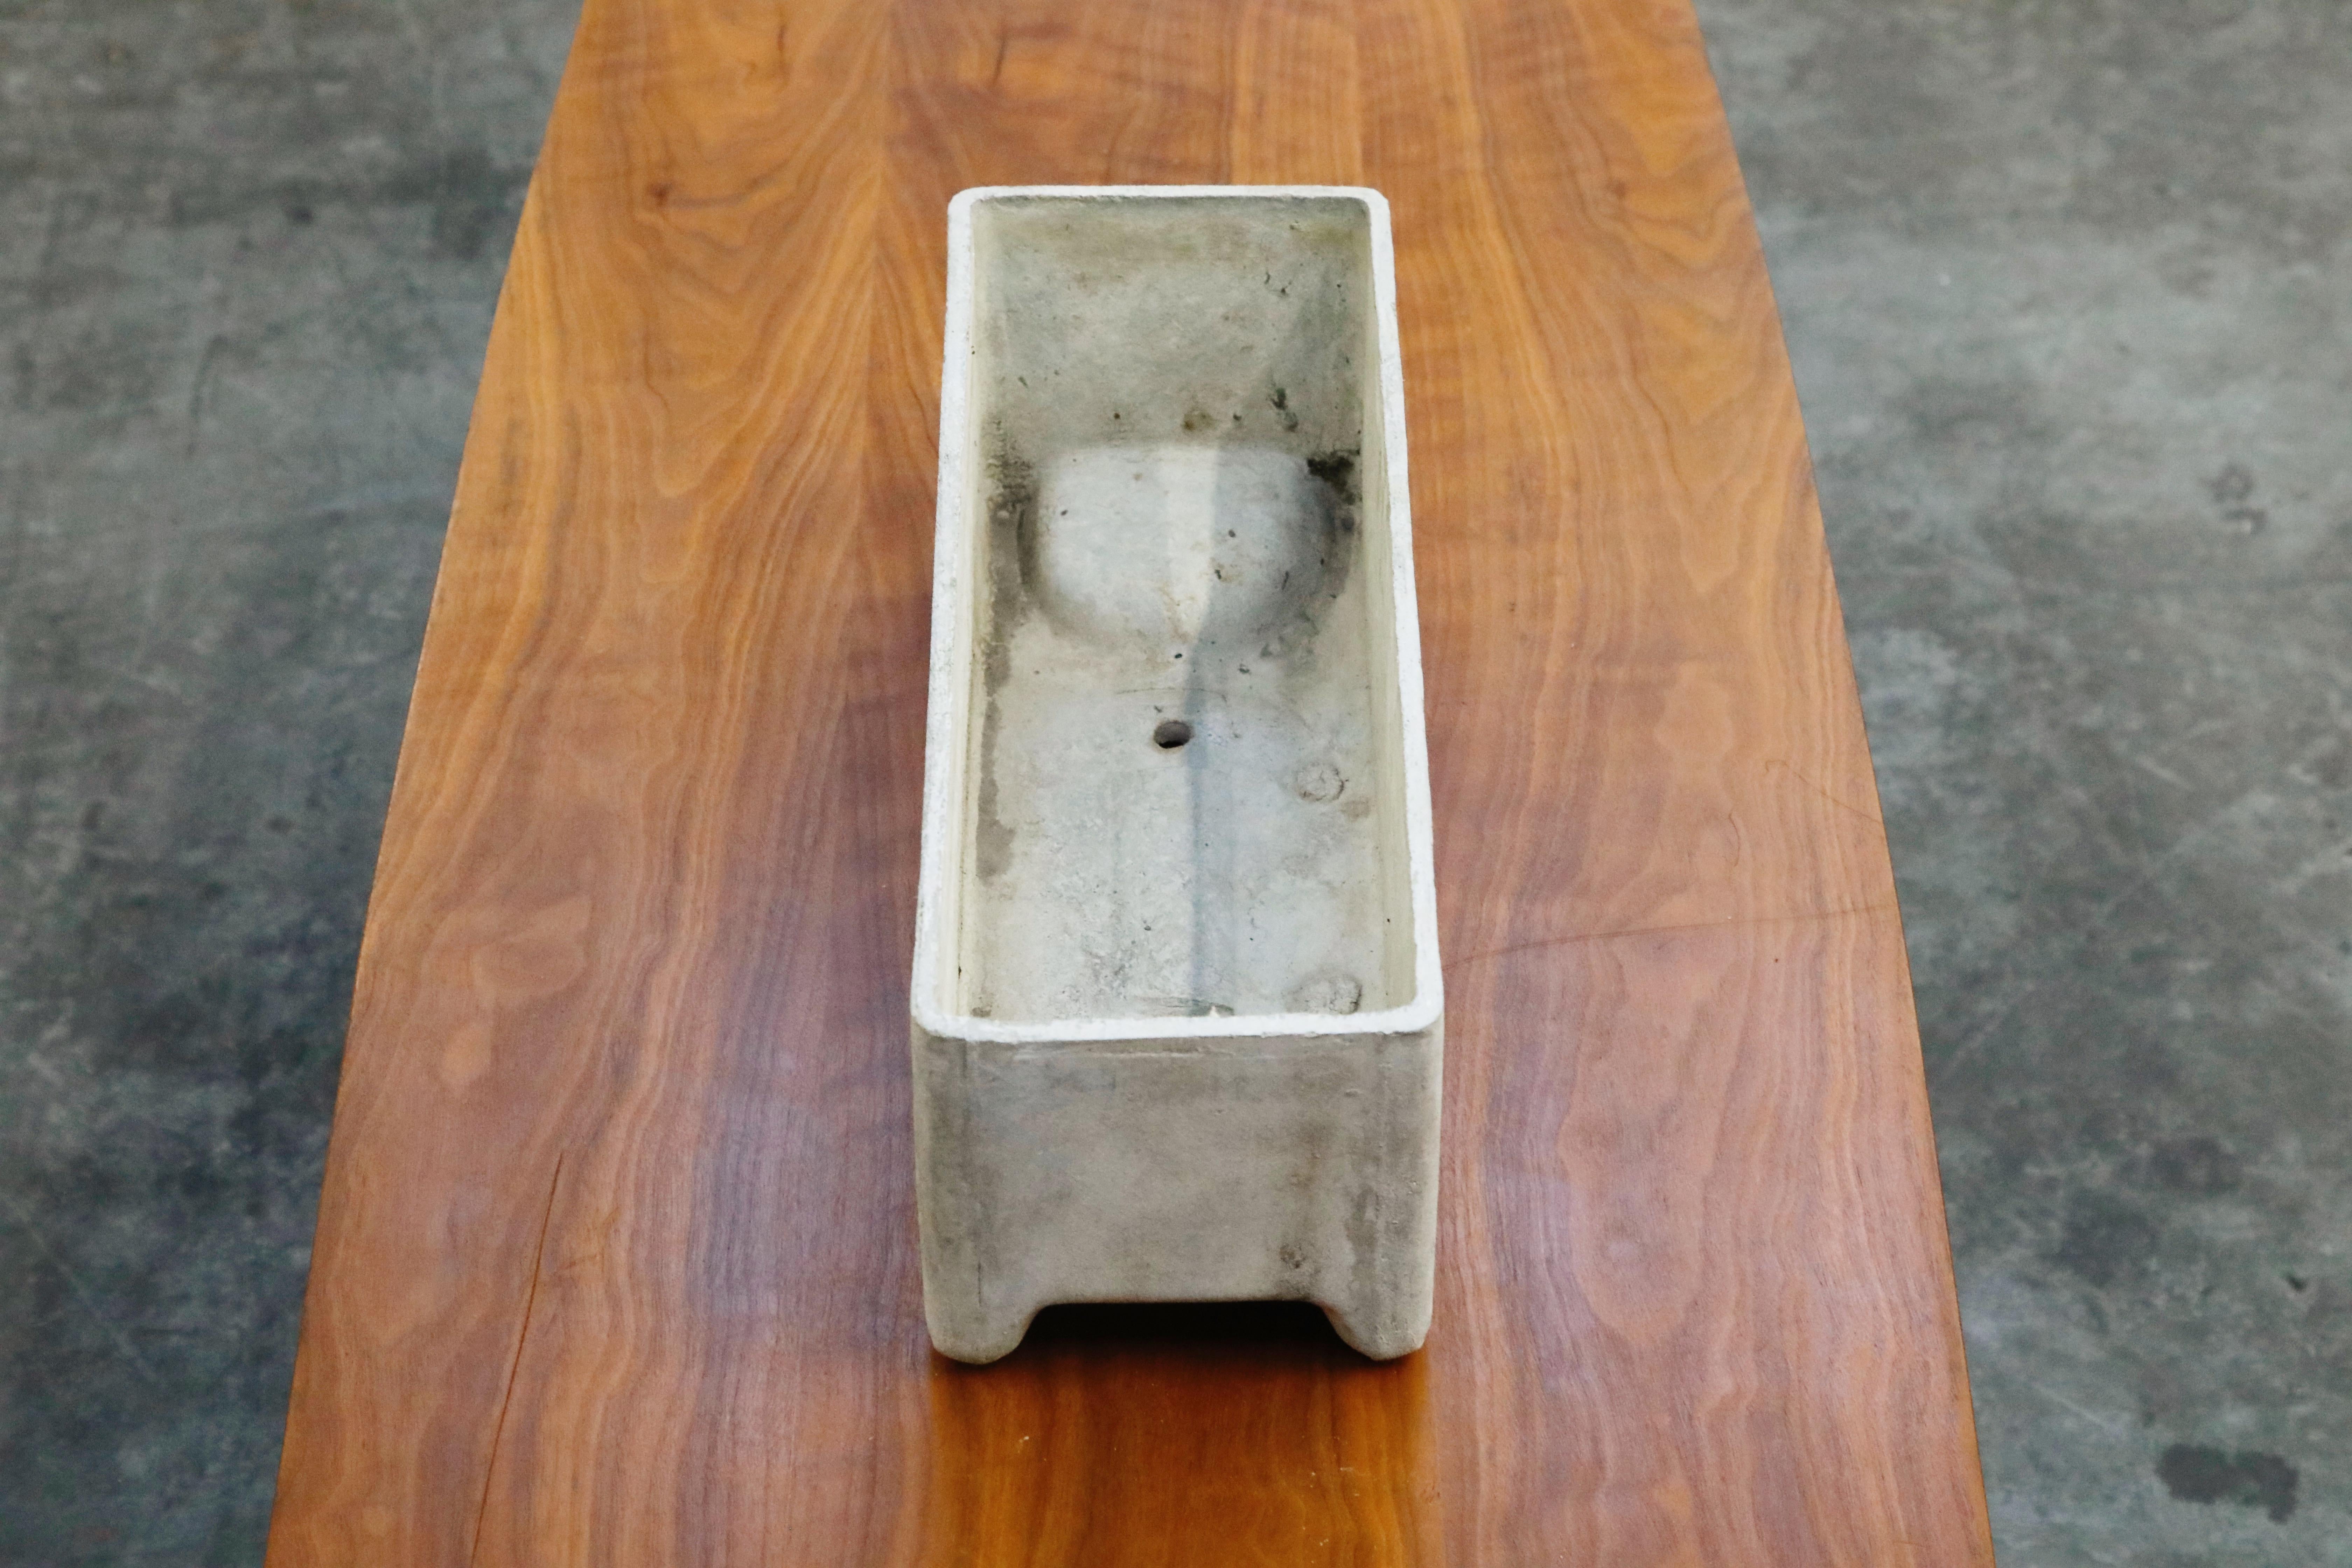 Willy Guhl for Eternit Large Rectangle Concrete Outdoor Planter, 1970s, Signed For Sale 3